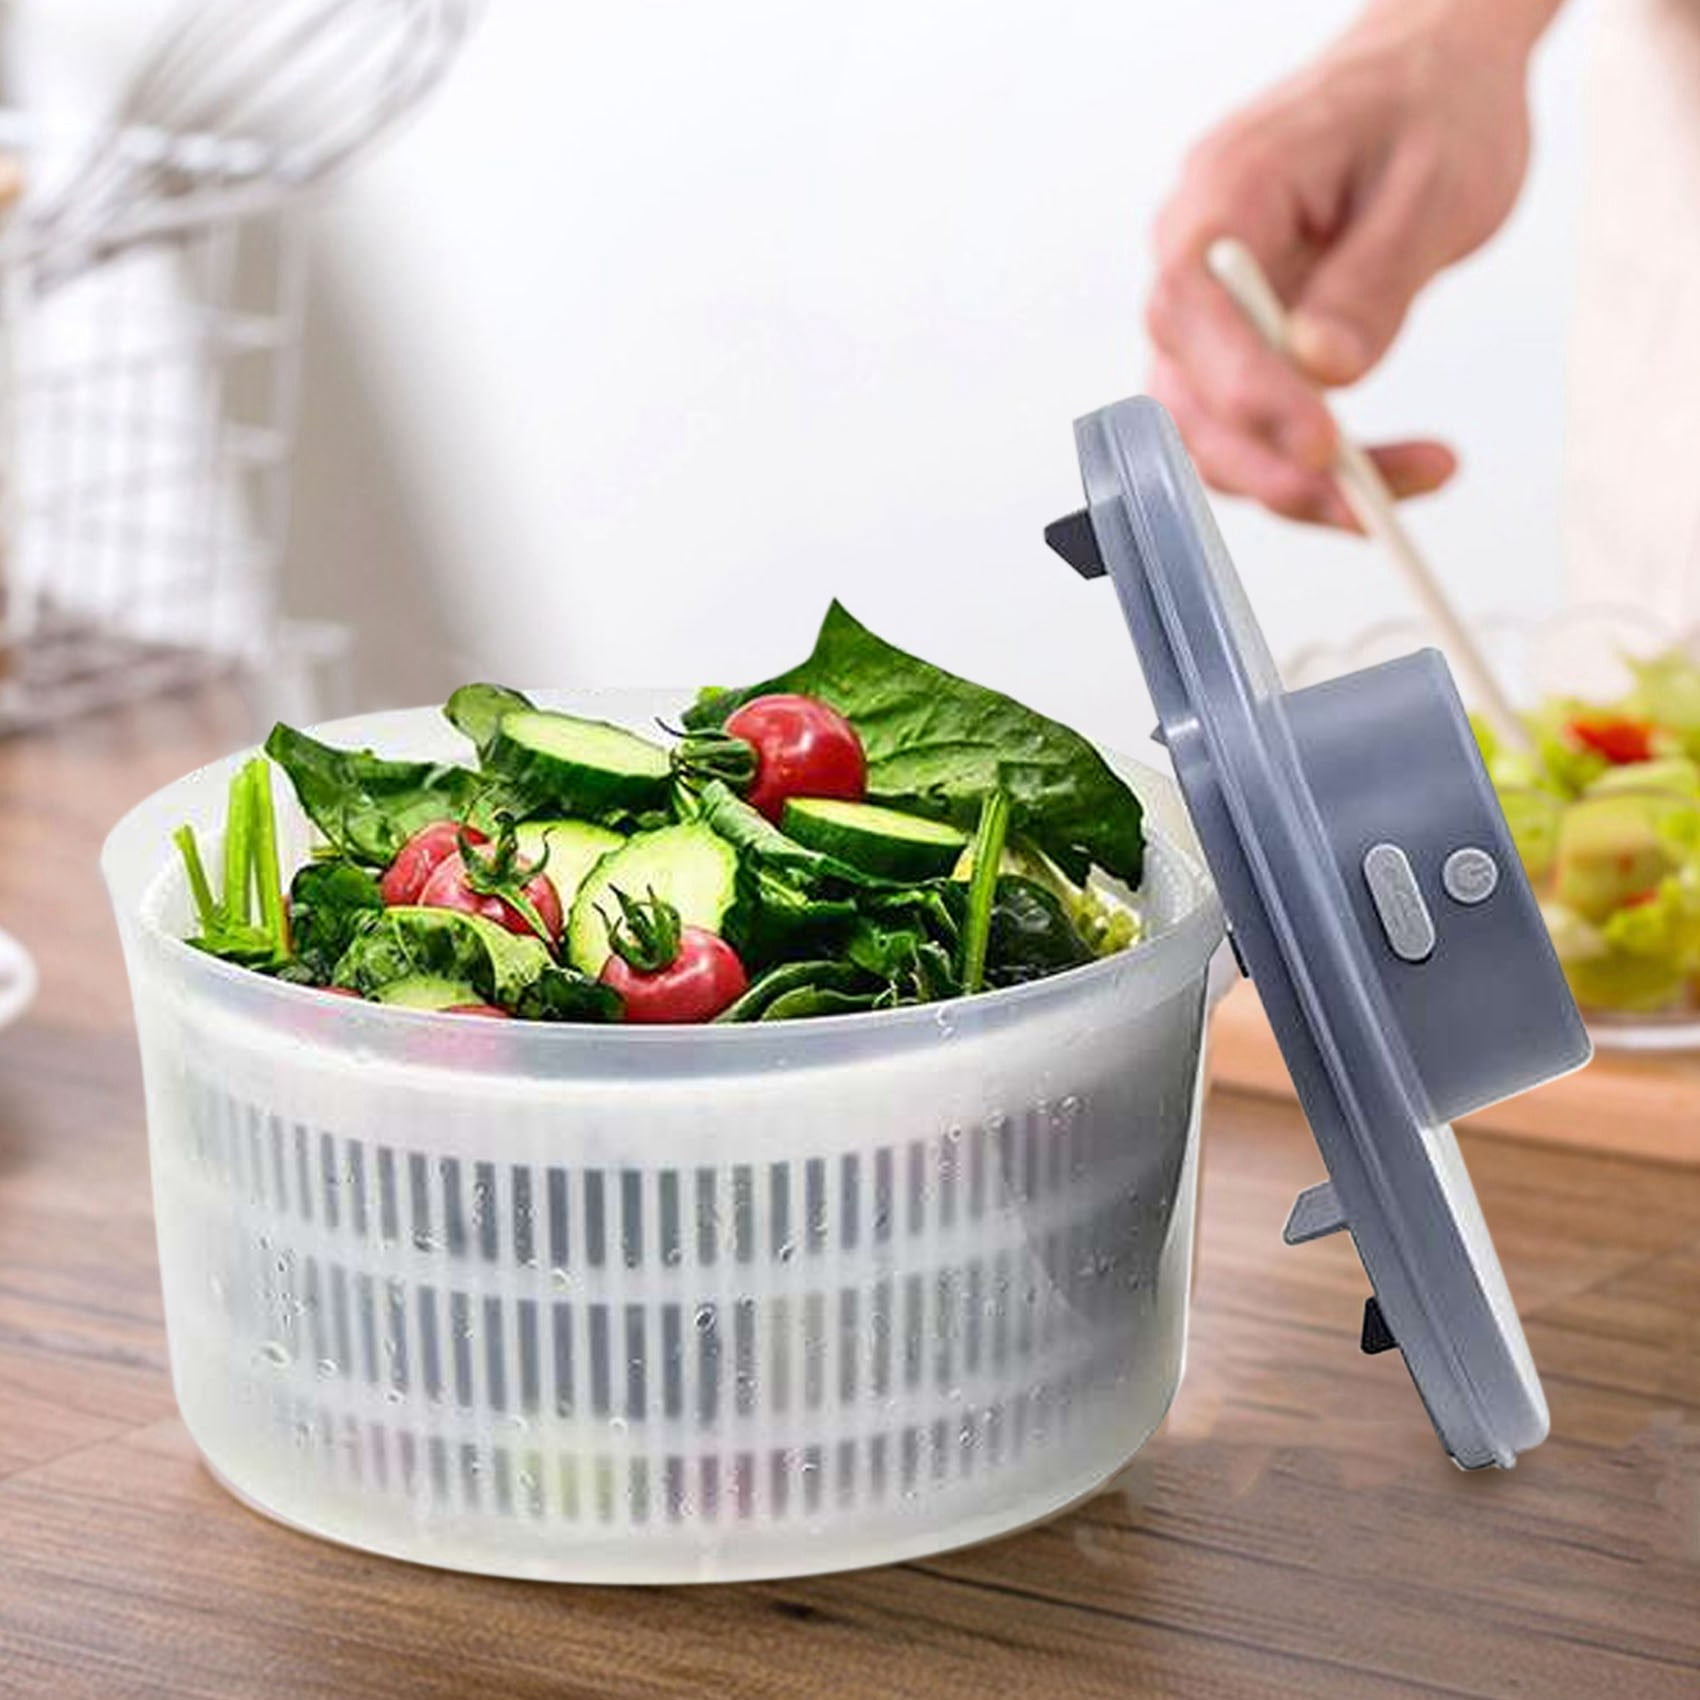  Focket Salad Spinner, Multi Use Stainless Steel Lettuce Spinner  Salad Spinner with Drain, Bowl and Colander, Manual Rotation Double Layer  Large Capacity Vegetable Dryer Fruit Washer : Home & Kitchen